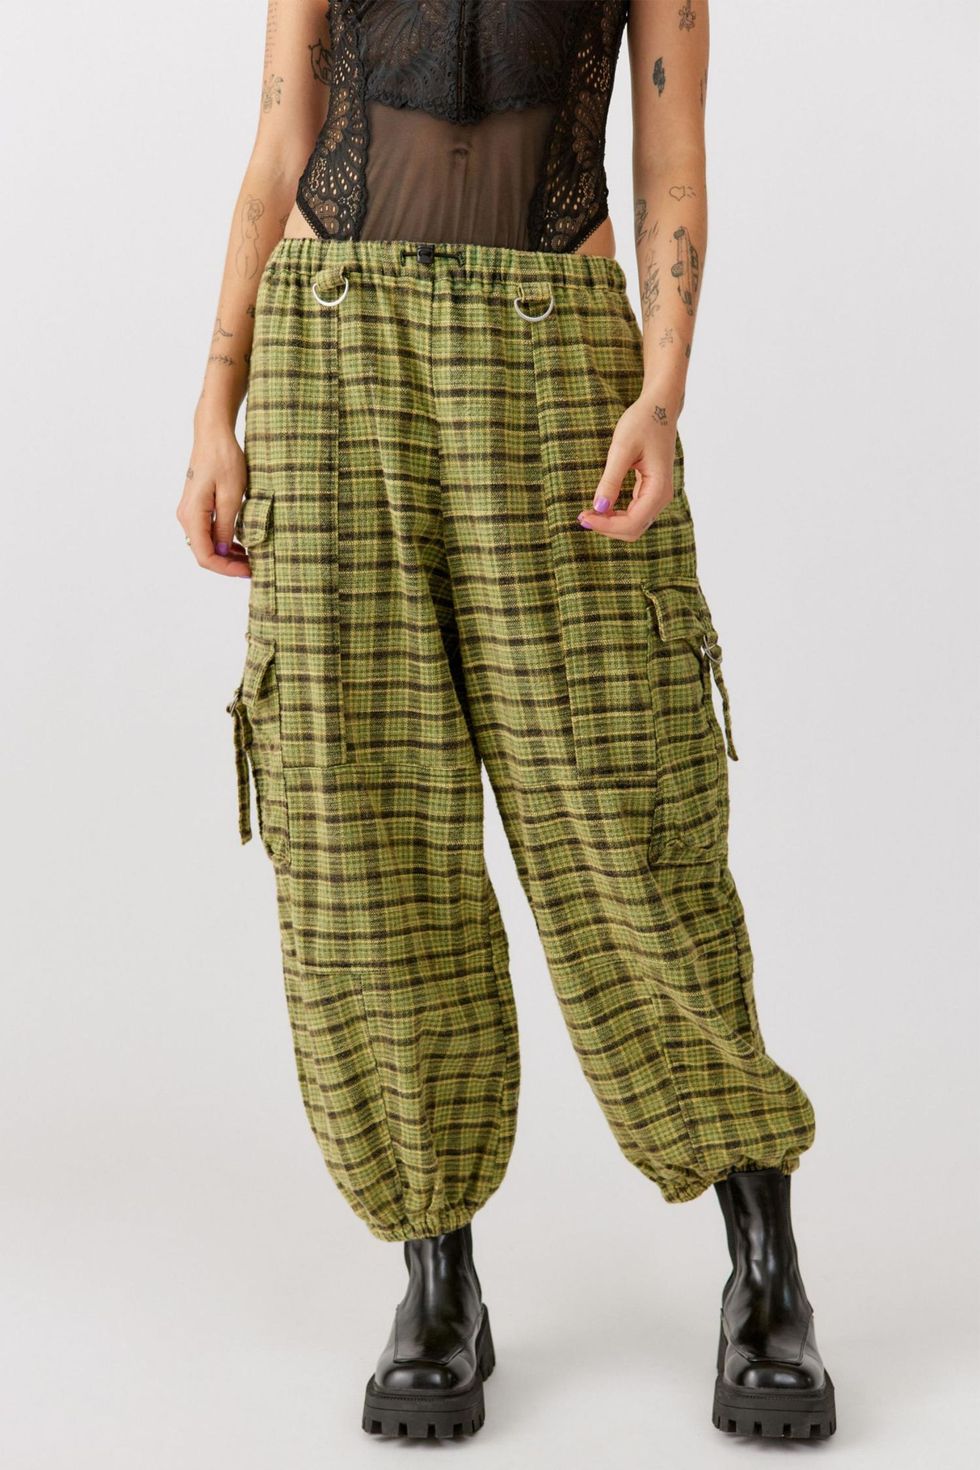 Best Parachute Pants - Y2K Is Here to Stay